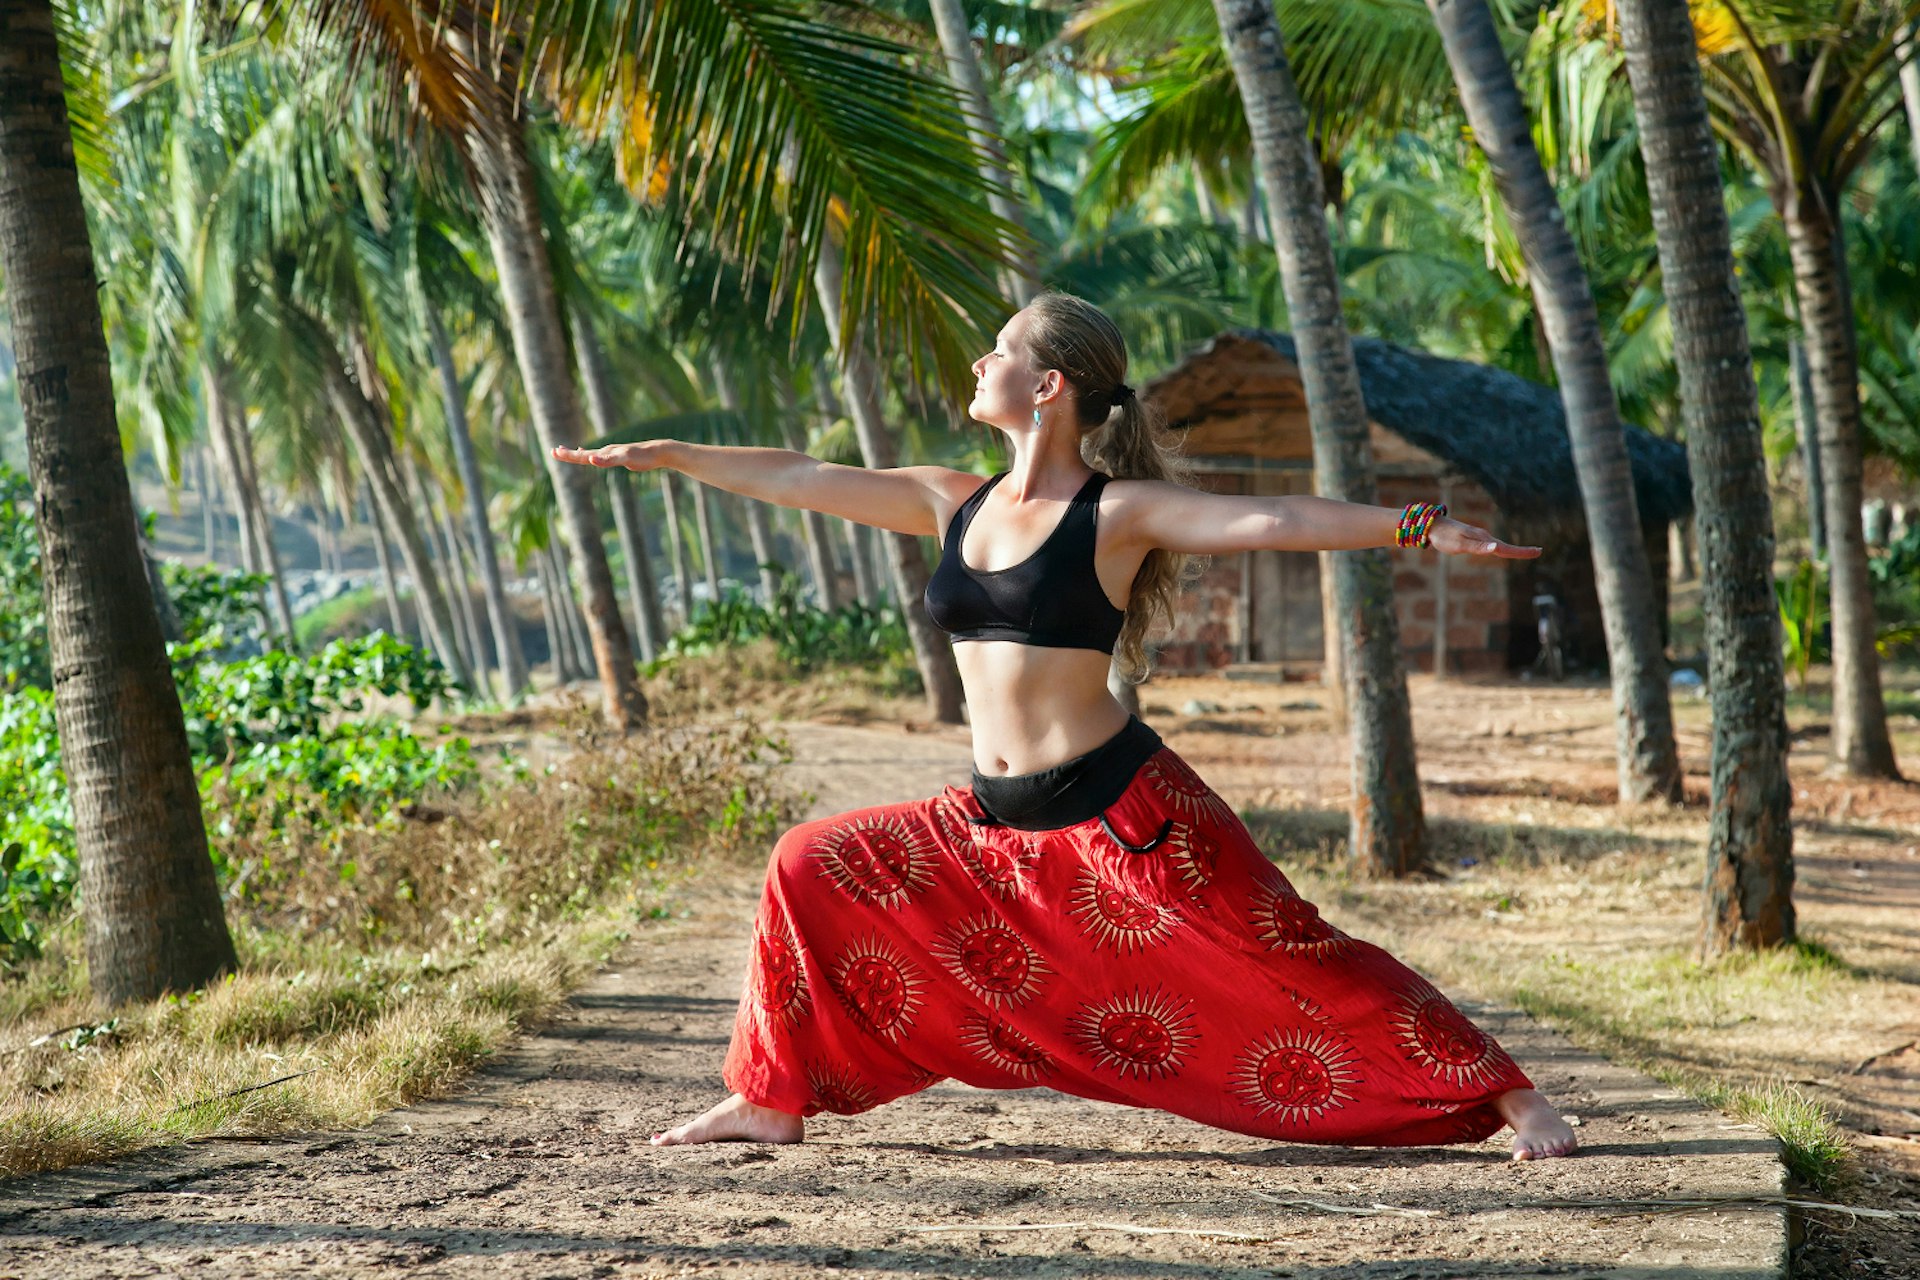 Yoga virabhadrasana II warrior pose by beautiful Caucasian woman in red Indian trousers with symbol om on the road in palm tree forest with house at background in India, Kerala, Varkala